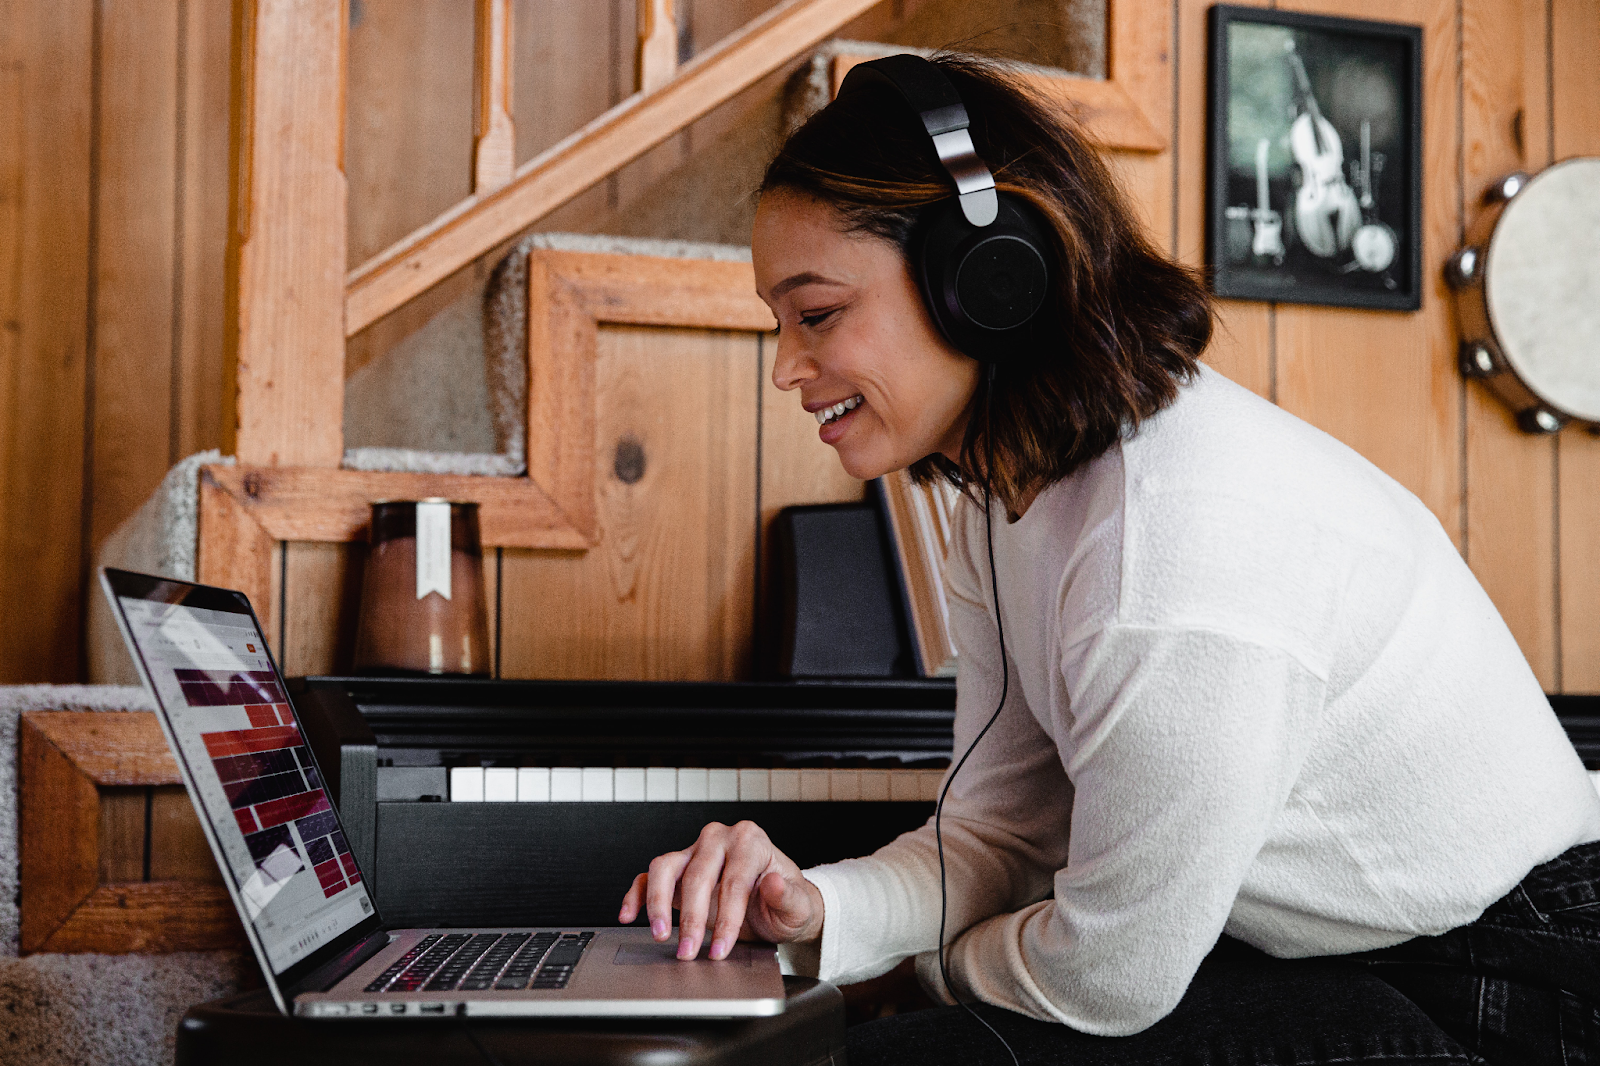 Smiling woman using a laptop with a headset.